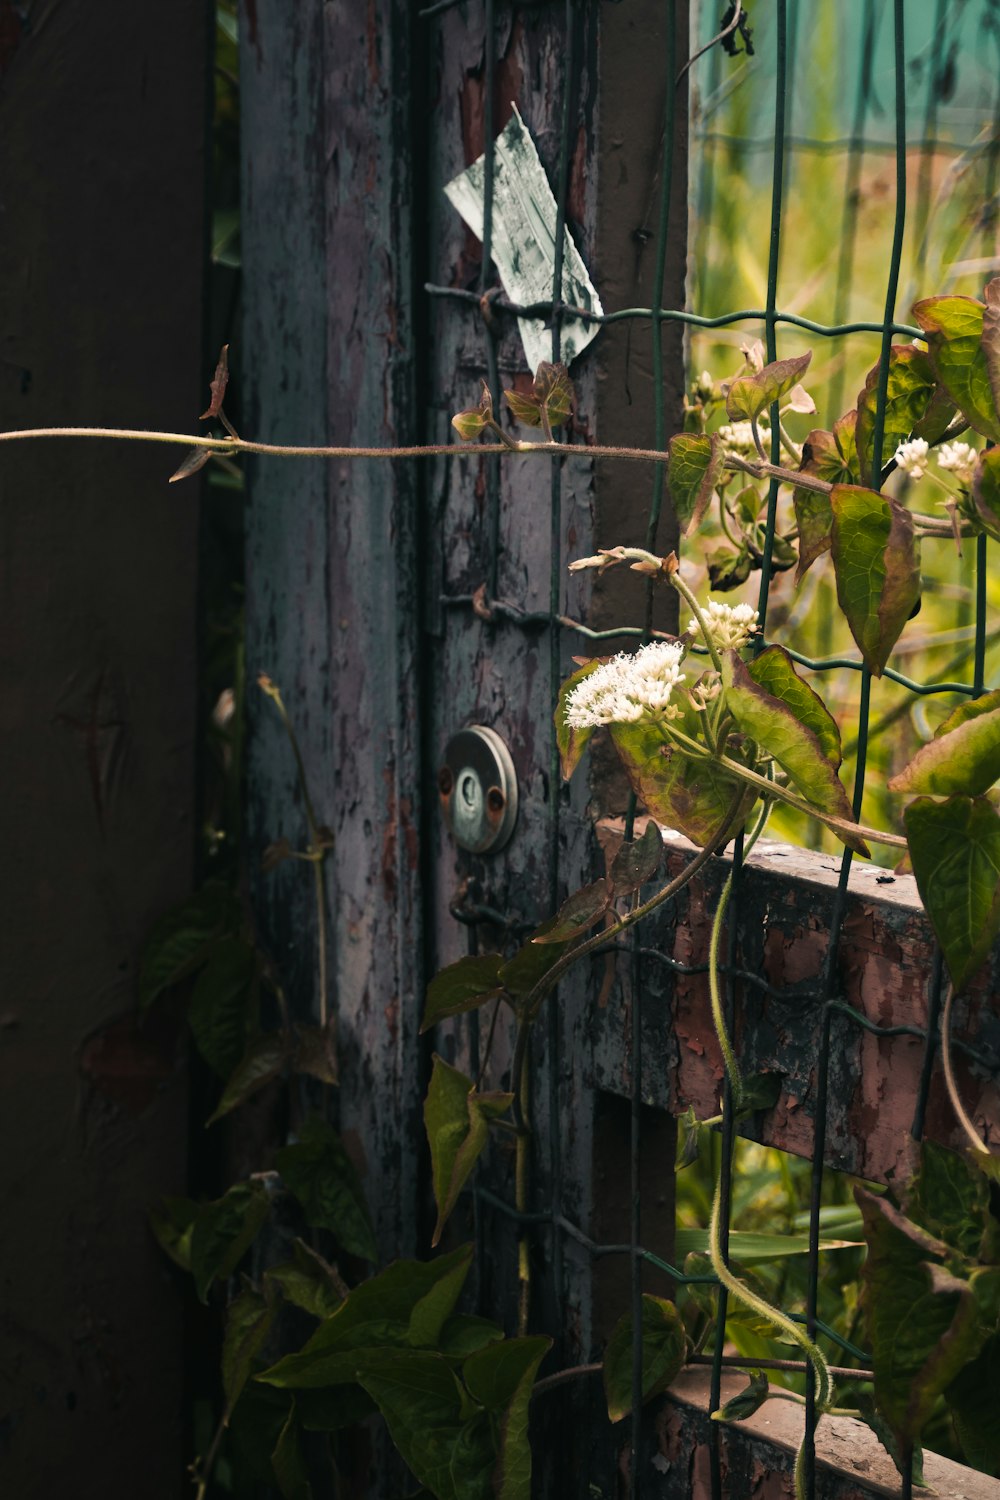 a rusty gate with vines growing on it